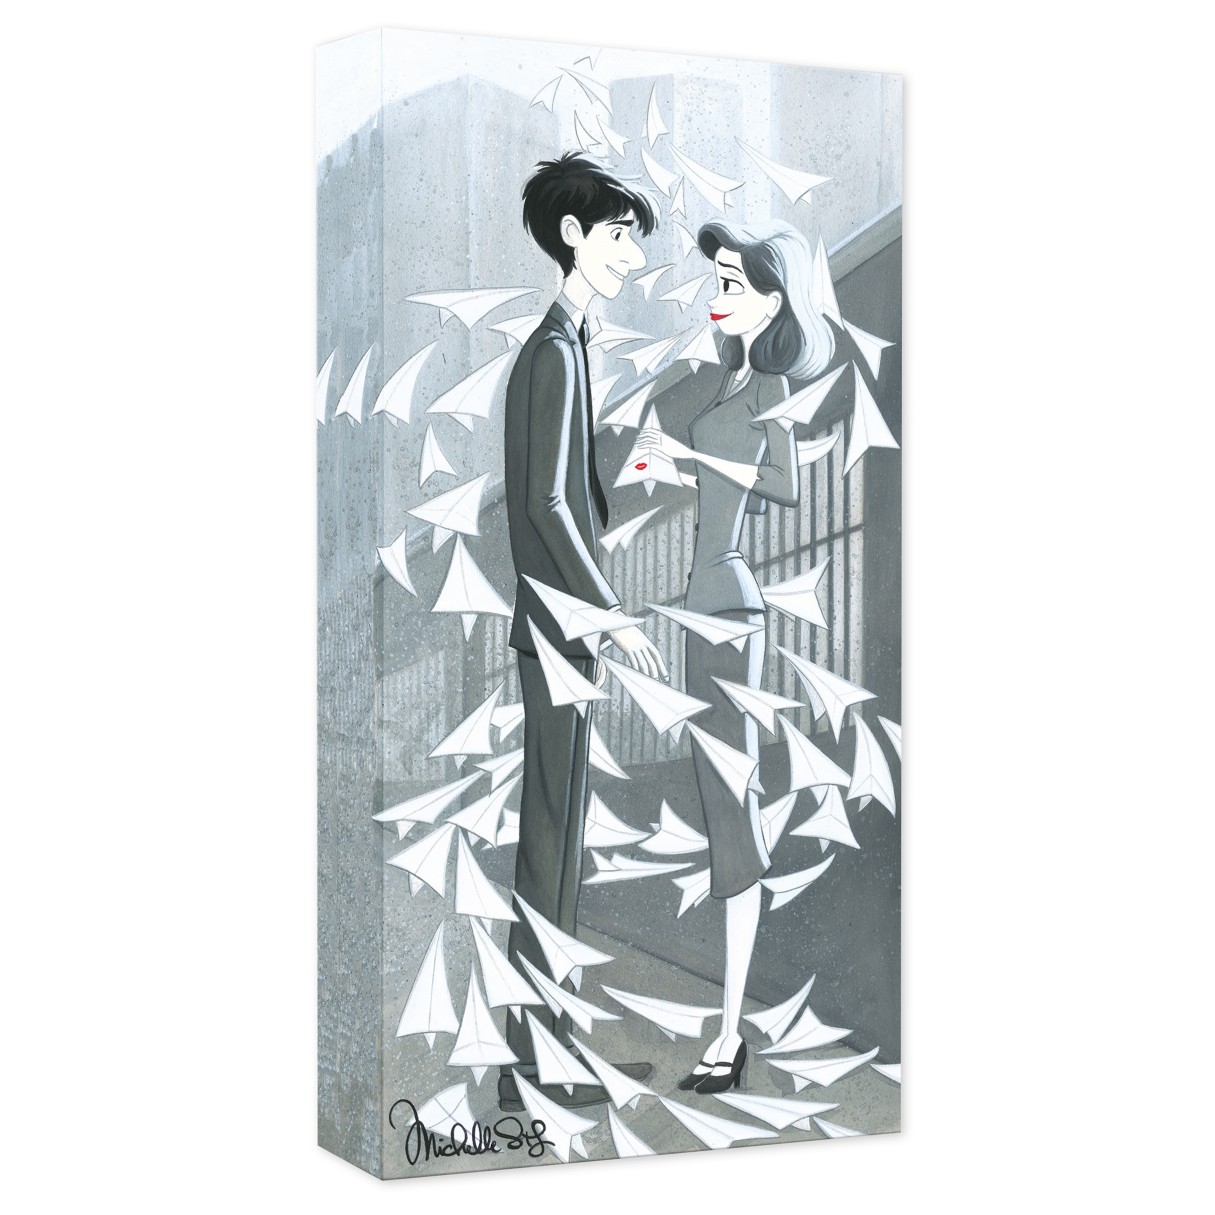 Paperman ''And Then There Was You'' Giclée on Canvas by Michelle St. Laurent